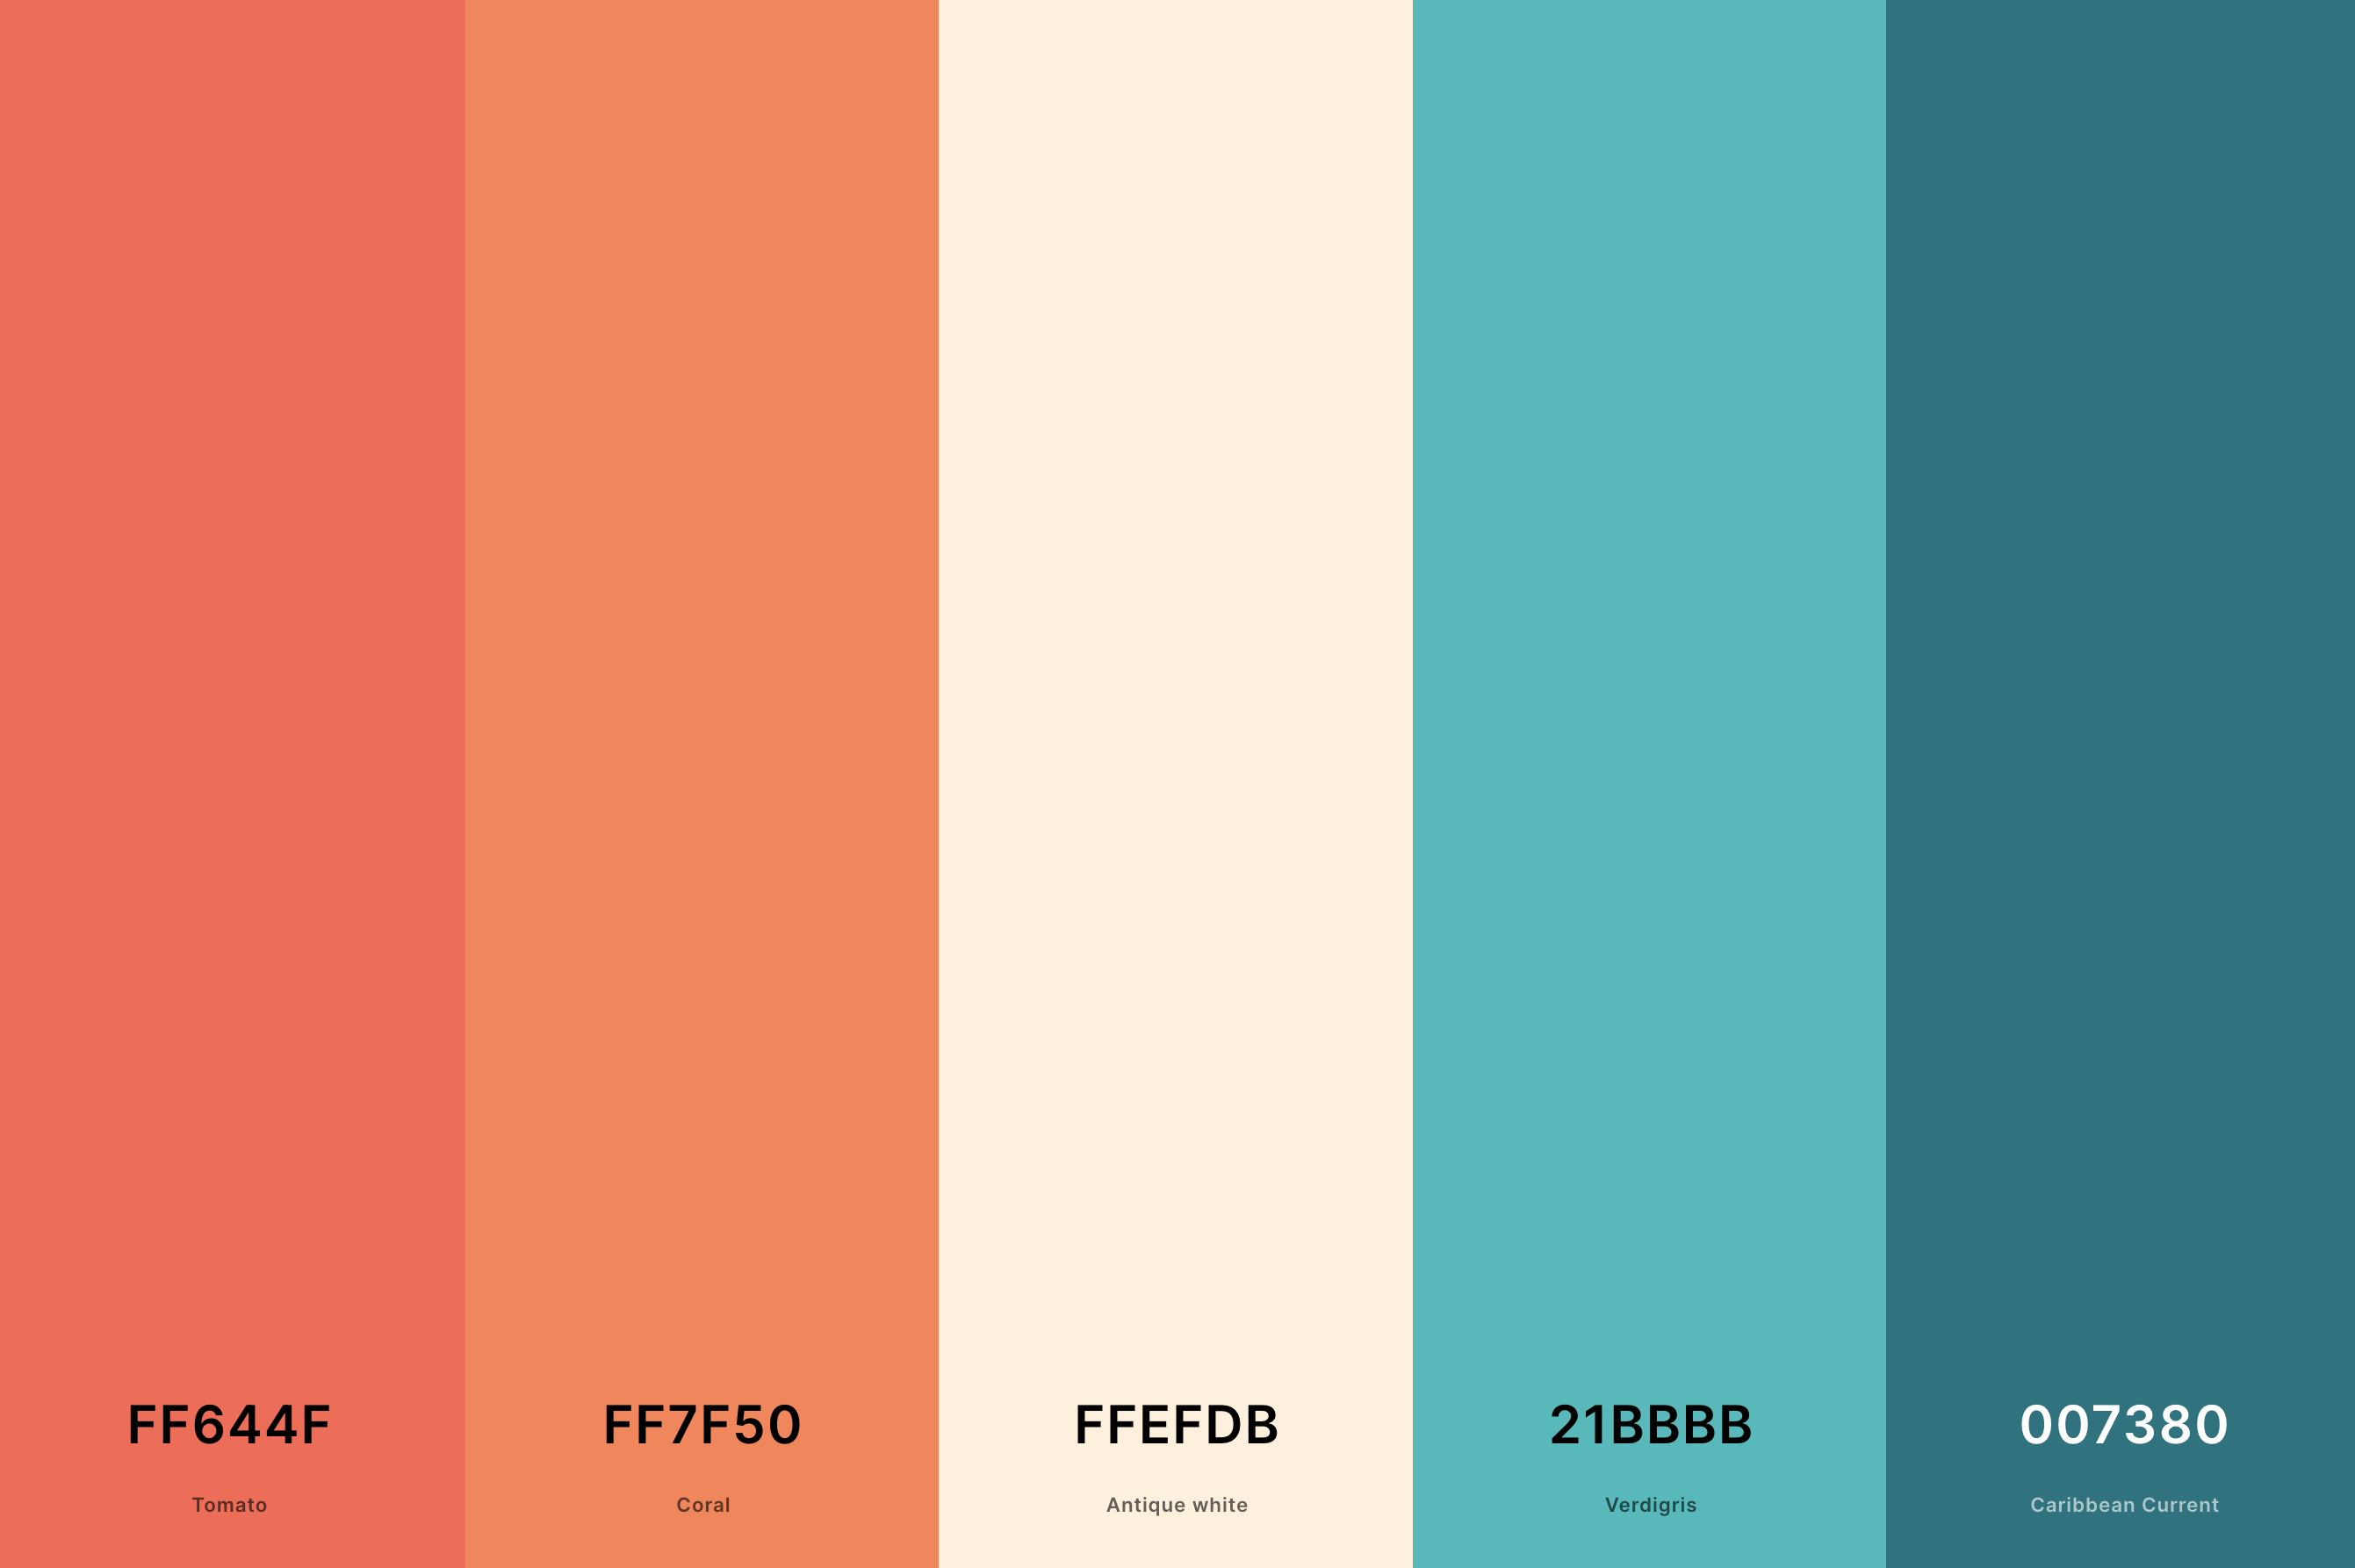 3. Coral And Teal Color Palette Color Palette with Tomato (Hex #FF644F) + Coral (Hex #FF7F50) + Antique White (Hex #FFEFDB) + Verdigris (Hex #21BBBB) + Caribbean Current (Hex #007380) Color Palette with Hex Codes